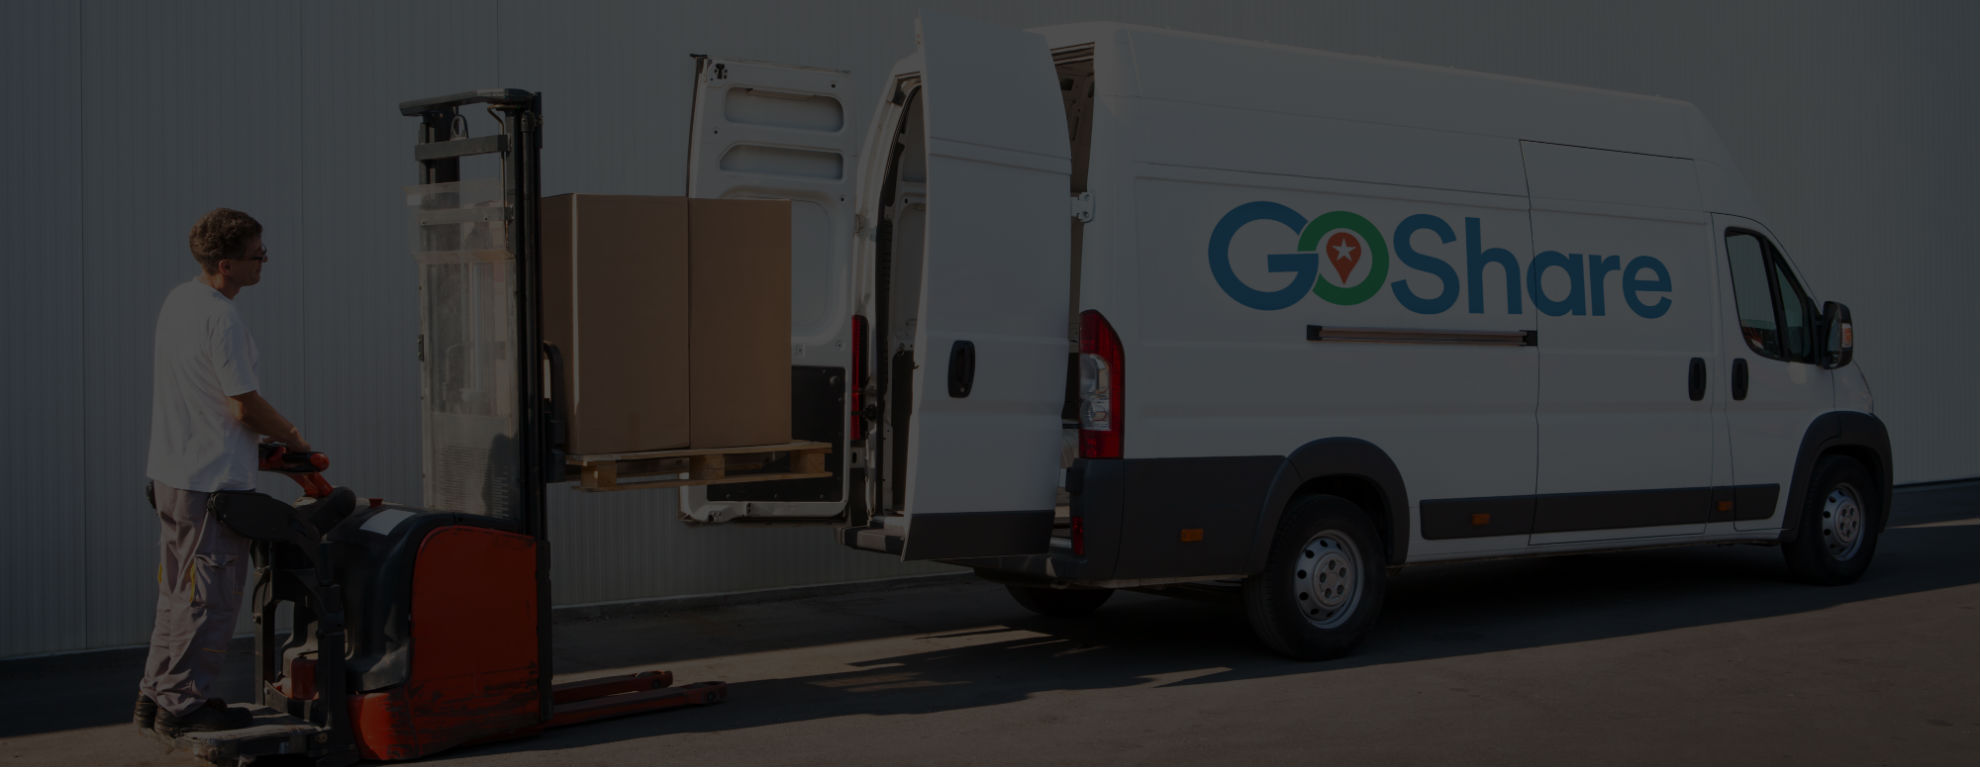 Same Day Courier Service London, Moving Company, MAN & VAN, Boutique  Direct Delivery